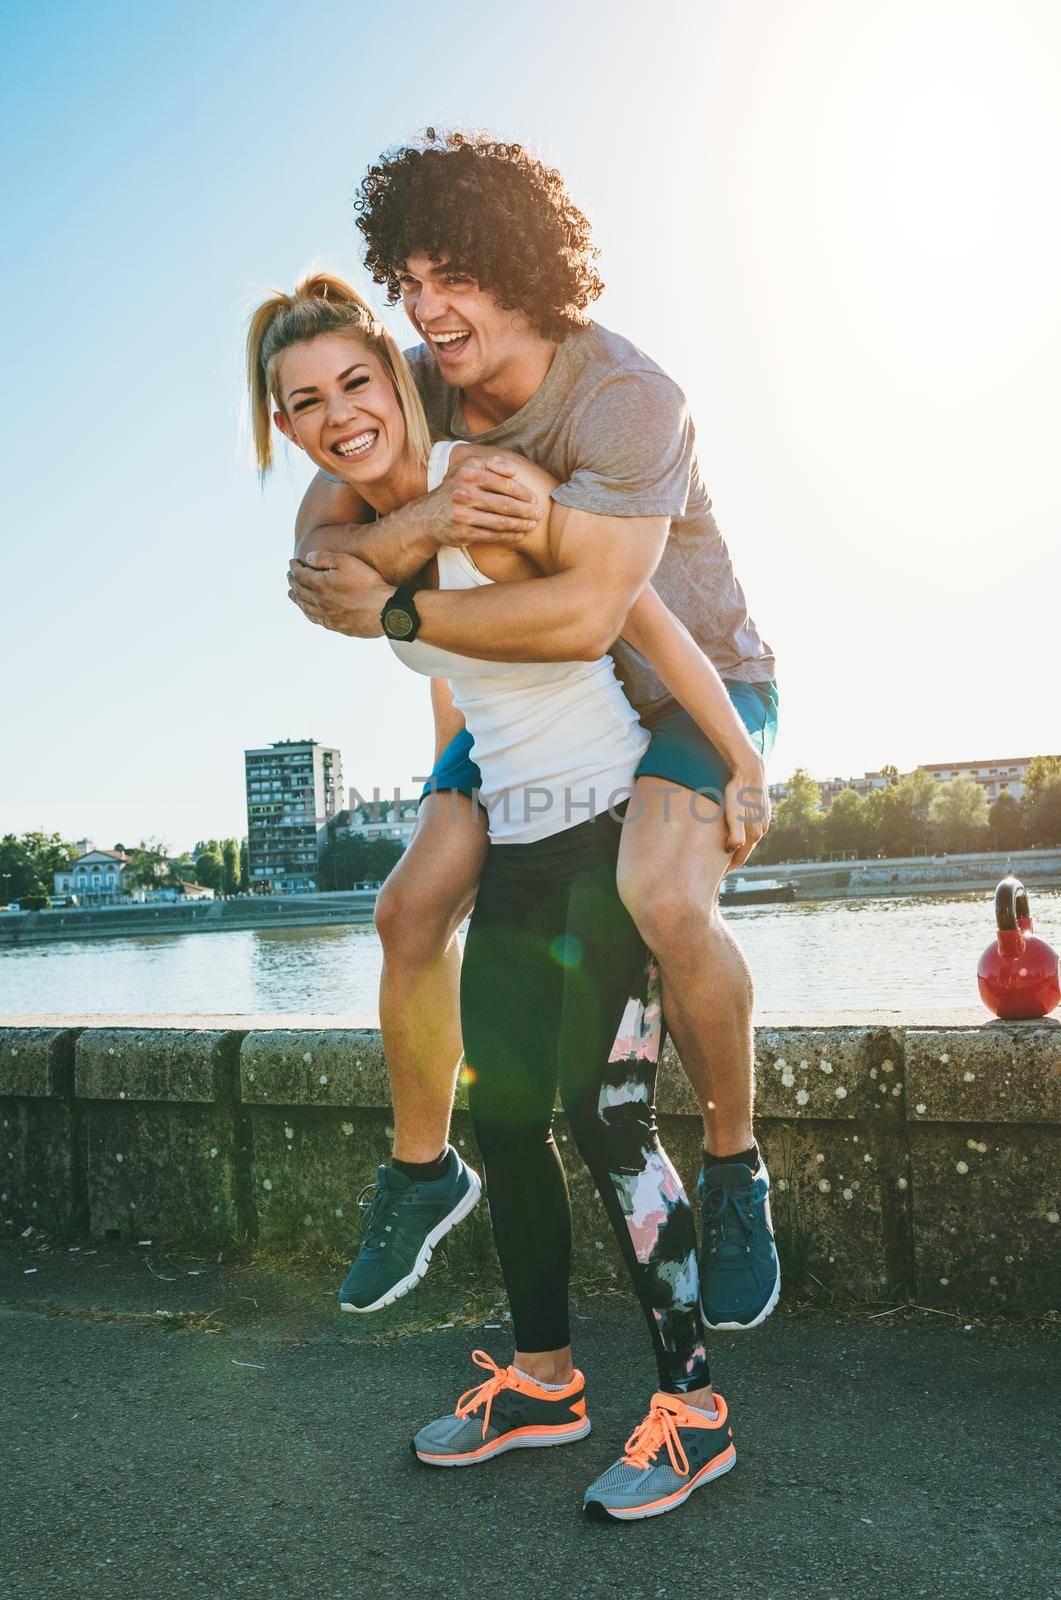 Young happy couple runners are having fun after training outdoors by the river, piggybacking in nature against blue sky with sunrise light.